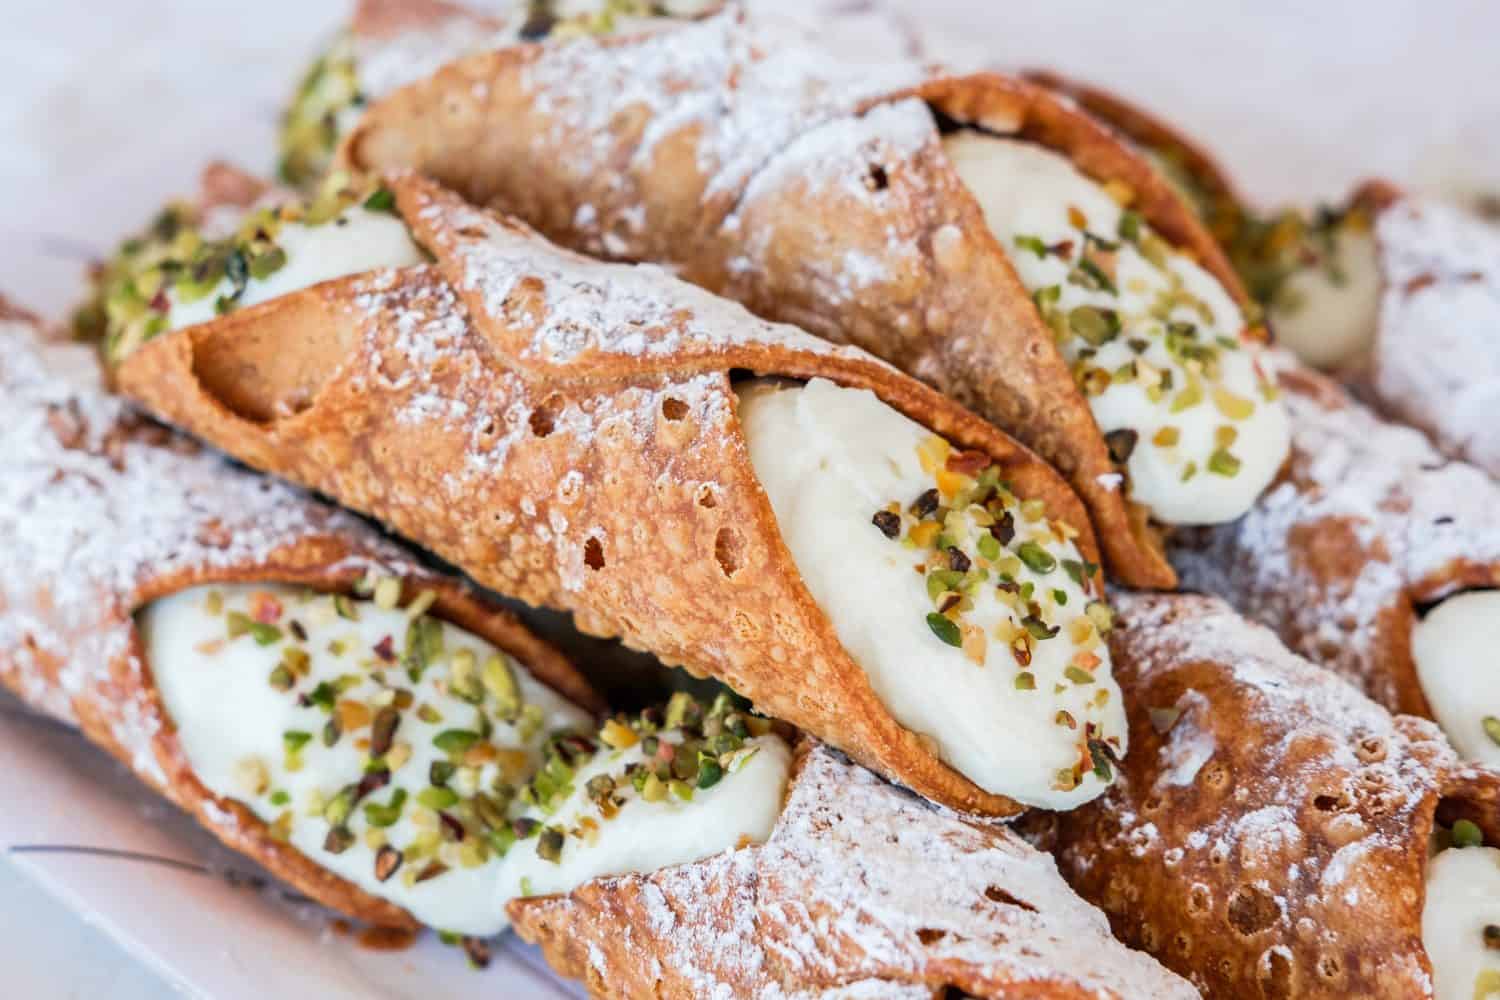 The "cannoli", typical Sicilian sweets.